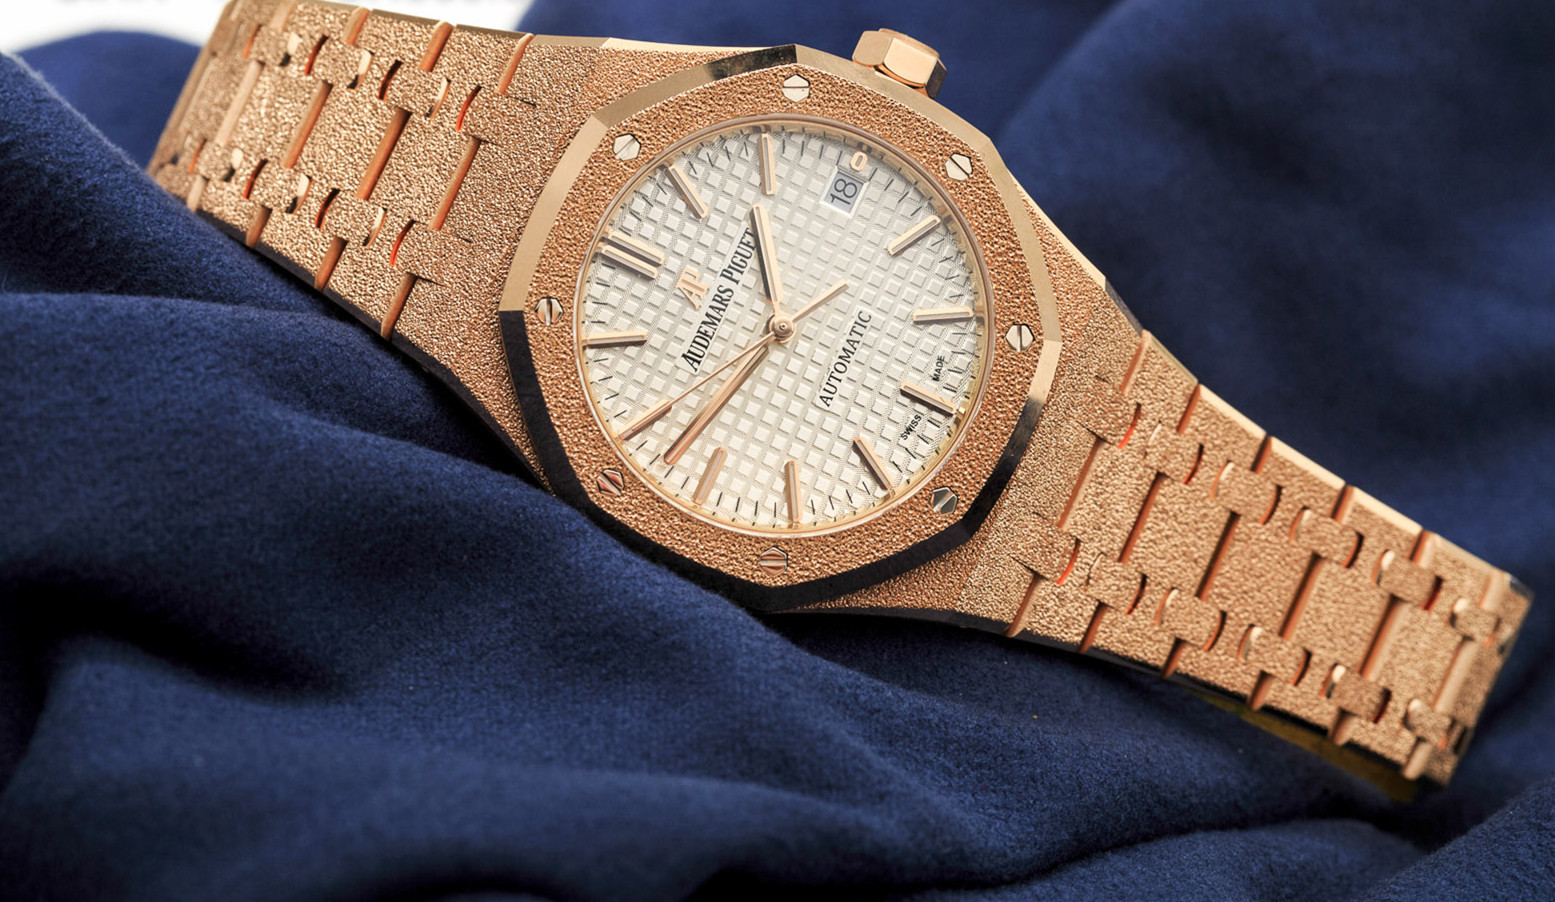 The fancy fake watches are made from rose gold.